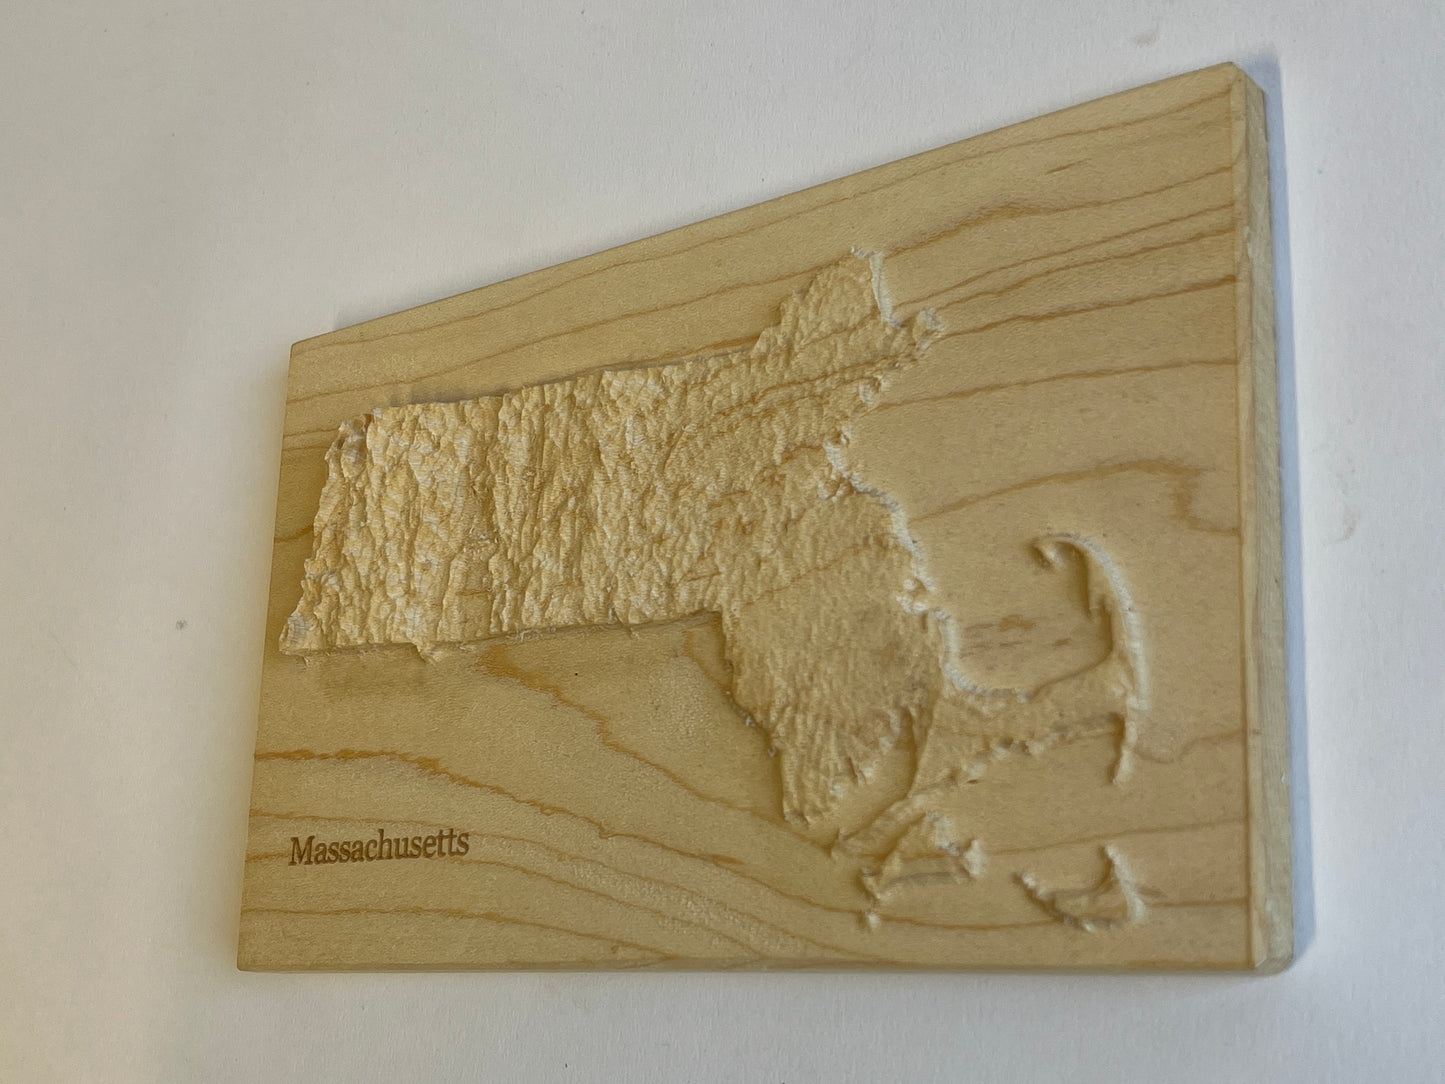 Massachusetts Map | Wood Carved Relief Map | 3D Topographic Wooden Map | Unique Wedding Birthday Housewarming Gift | Massachusetts Gift